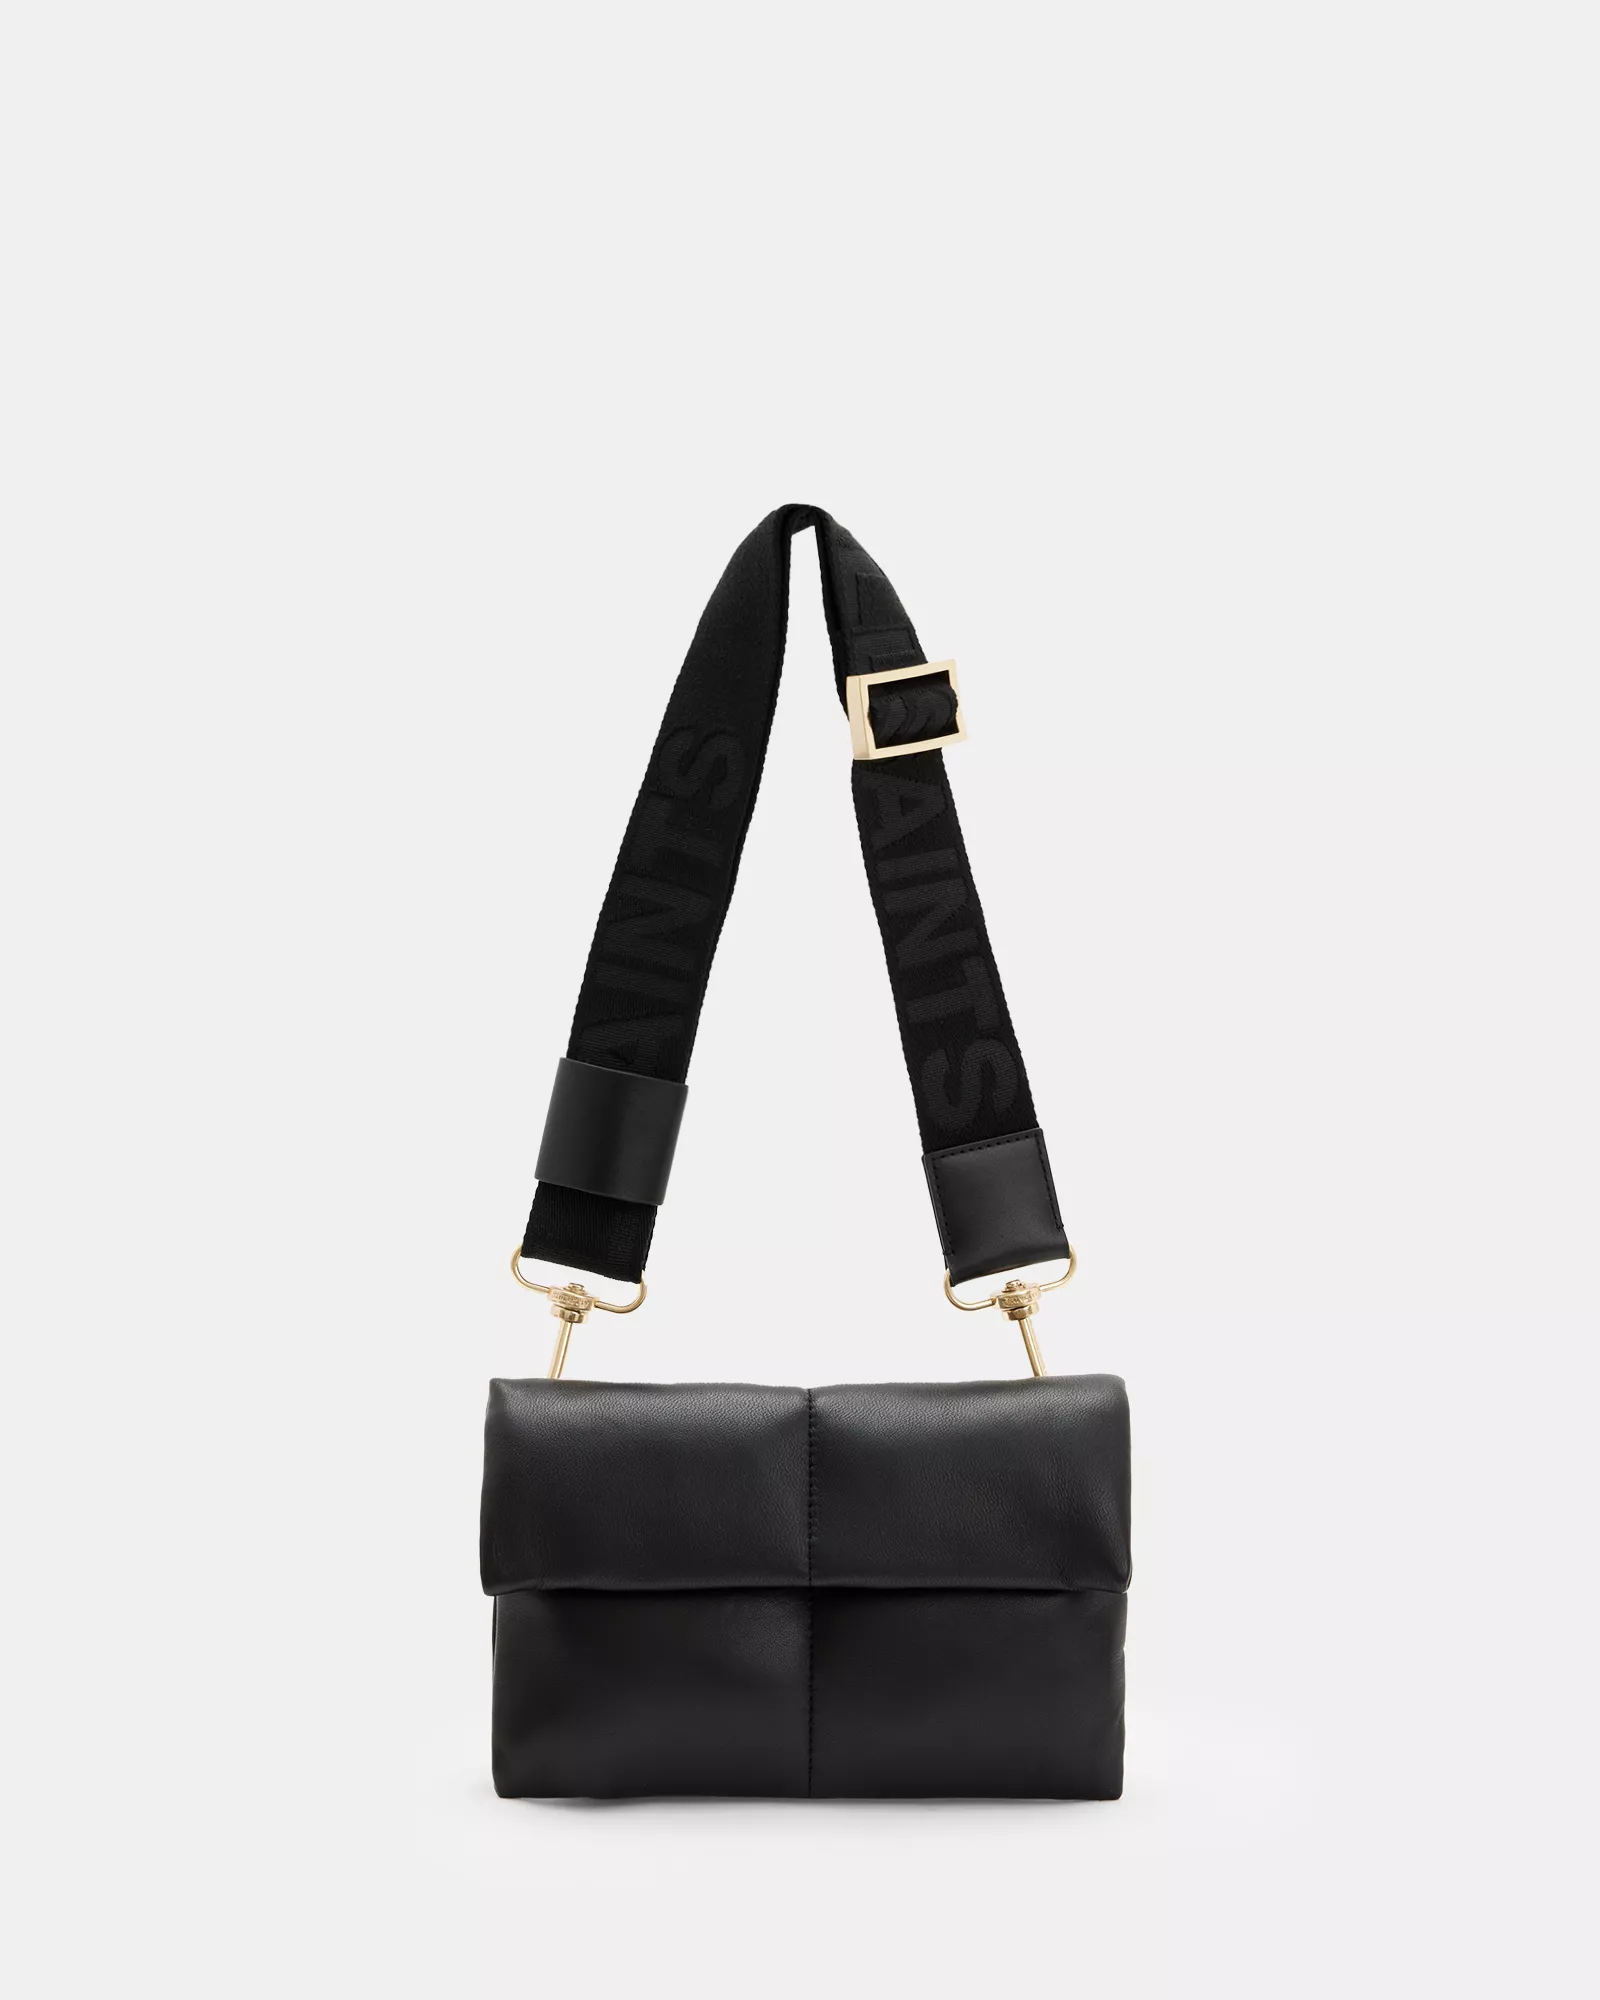 THINK ROYLN Nell Tote Bag curated on LTK